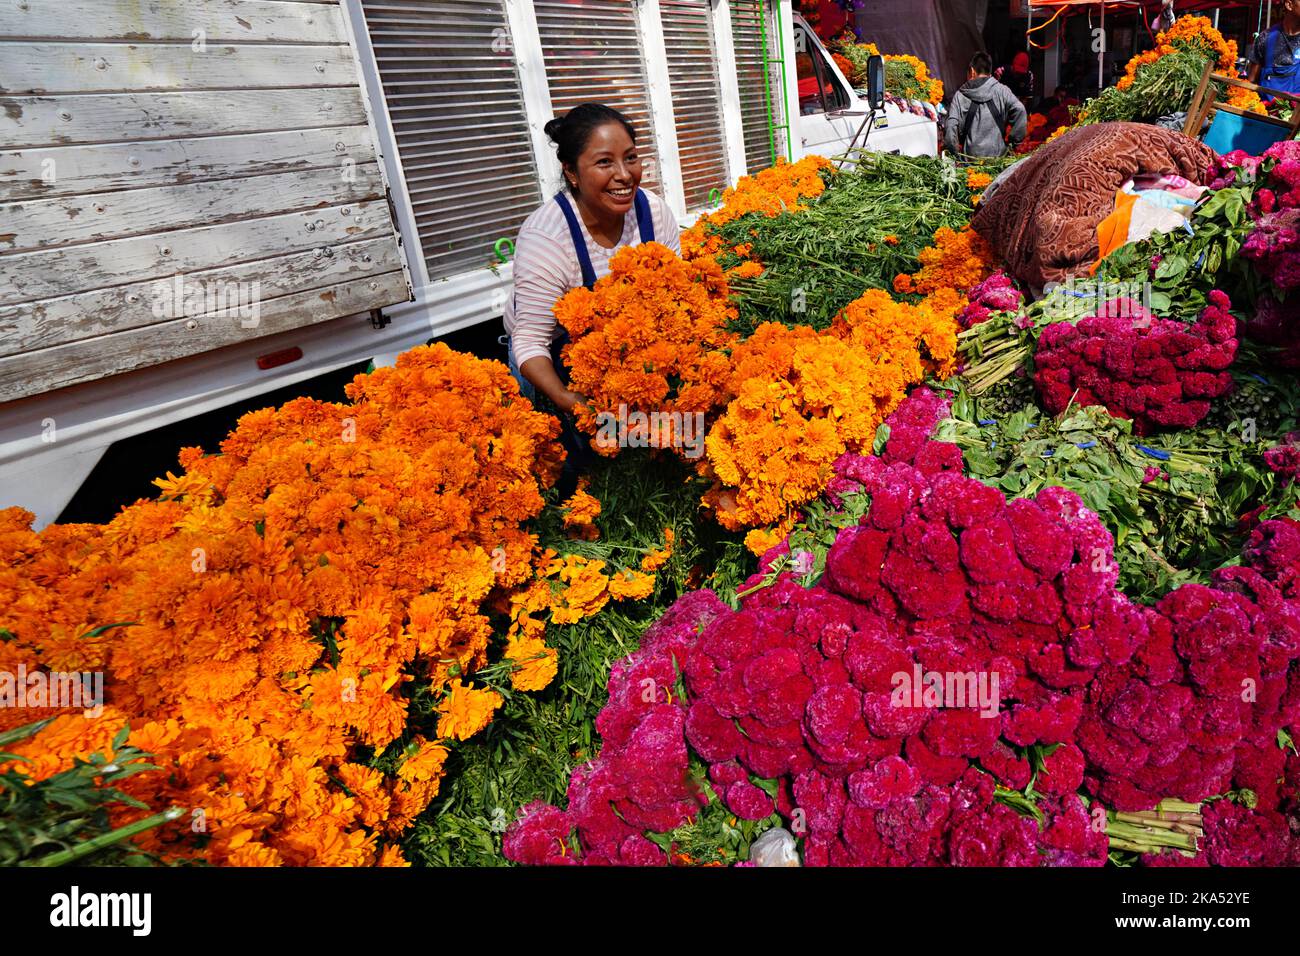 Mexico City, Mexico. 31st Oct, 2022. A flower vendor arranges piles of red cockscomb and cempasuchil, the traditional Day of the Dead flowers used to decorate altars and gravesites during the annual festival at the Jamaica Flower Market, October 31, 2022 in Mexico City, Mexico. Credit: Richard Ellis/Richard Ellis/Alamy Live News Stock Photo